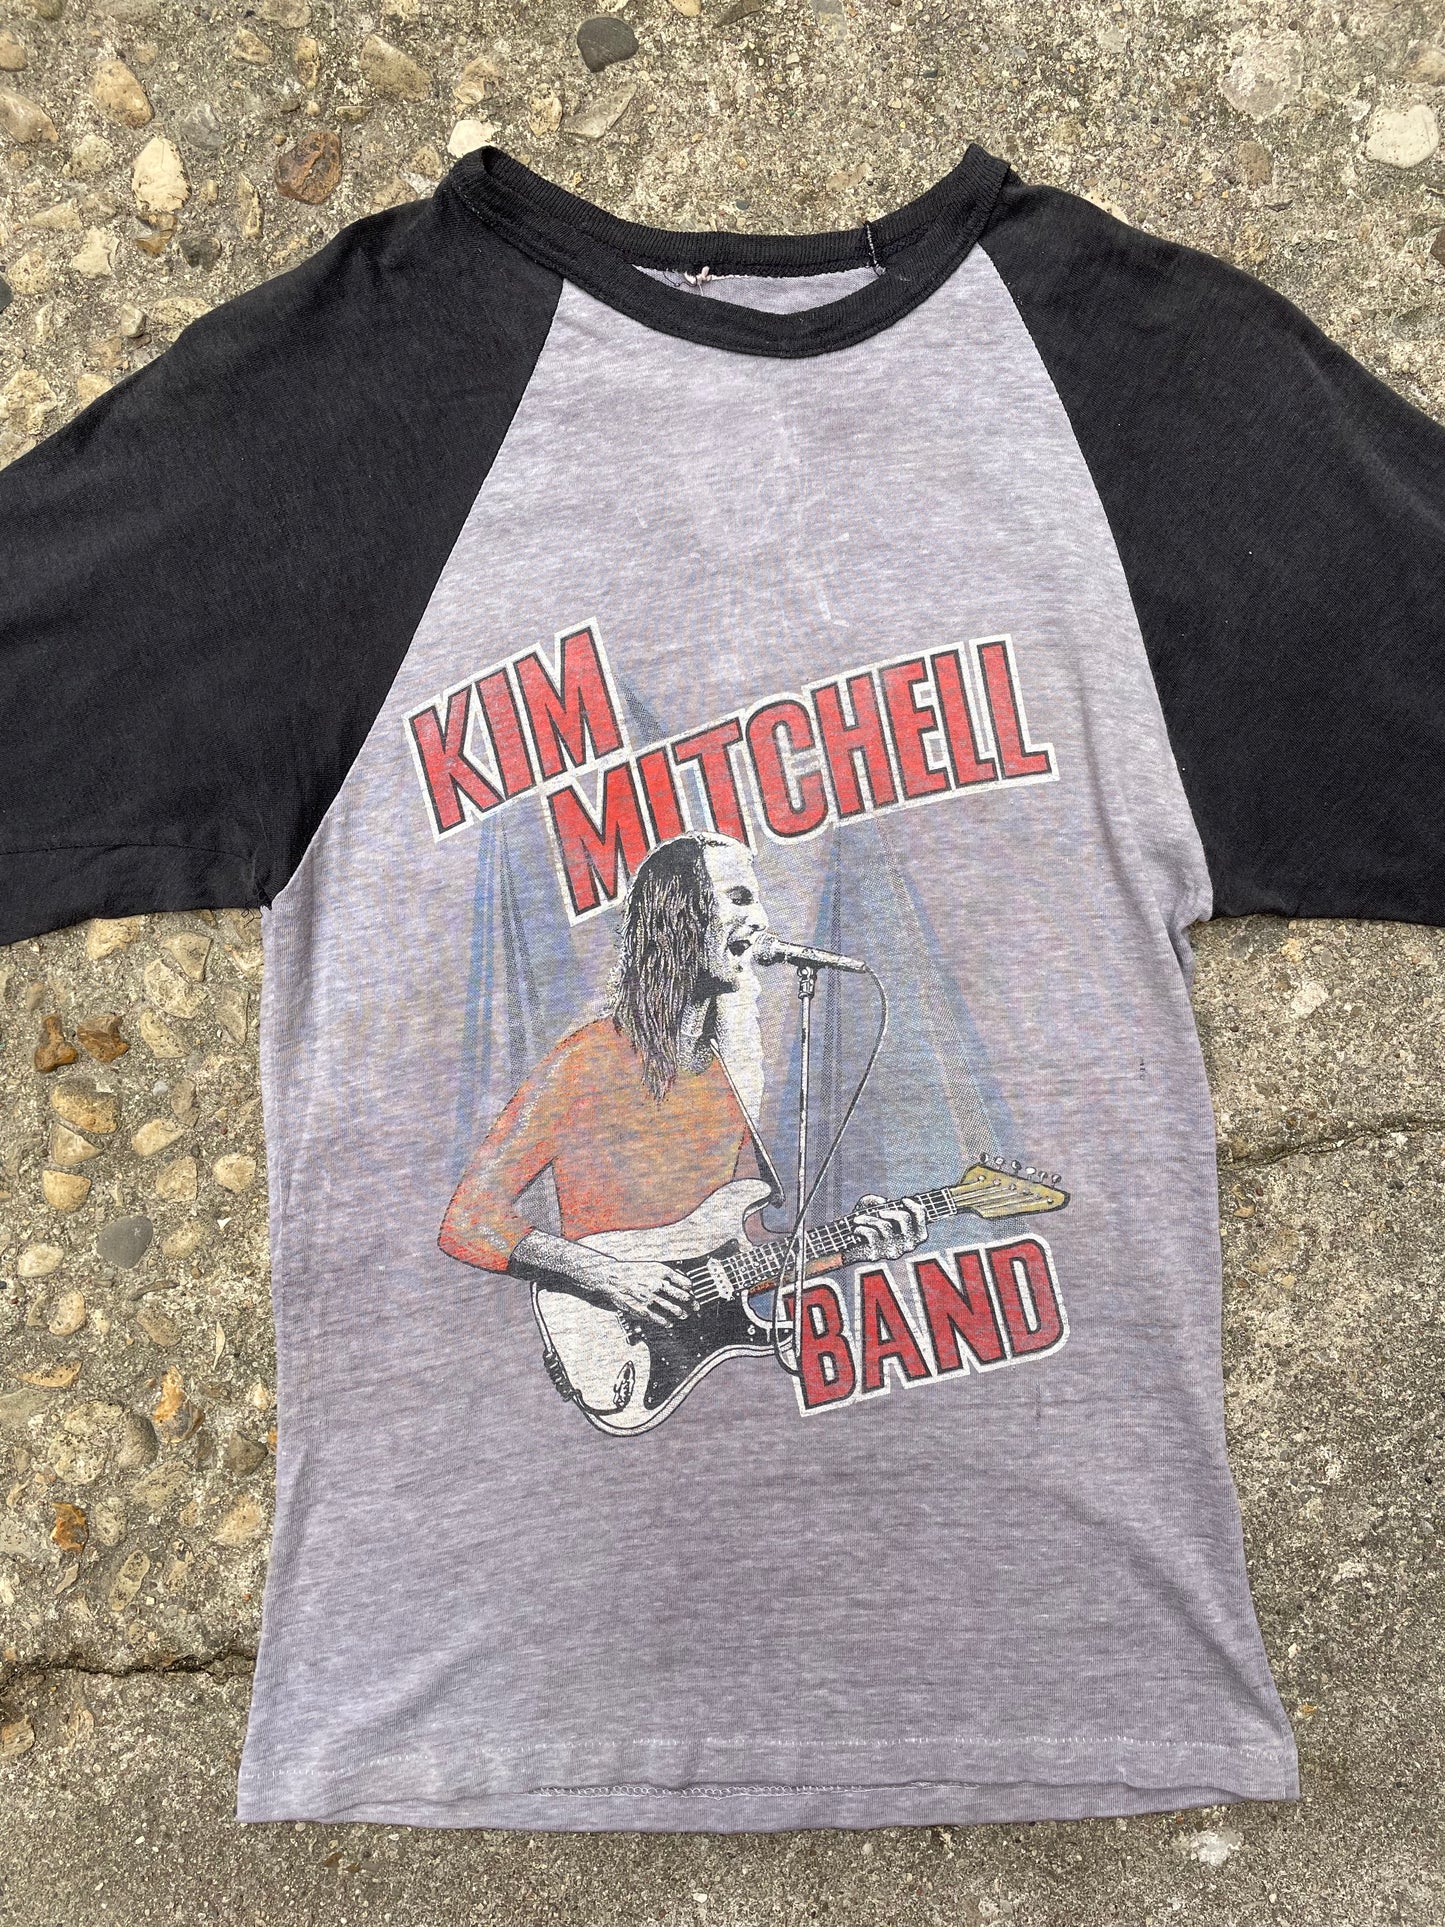 1982 Kim Mitchell 'Kids in Action' Tour Band T-Shirt - S